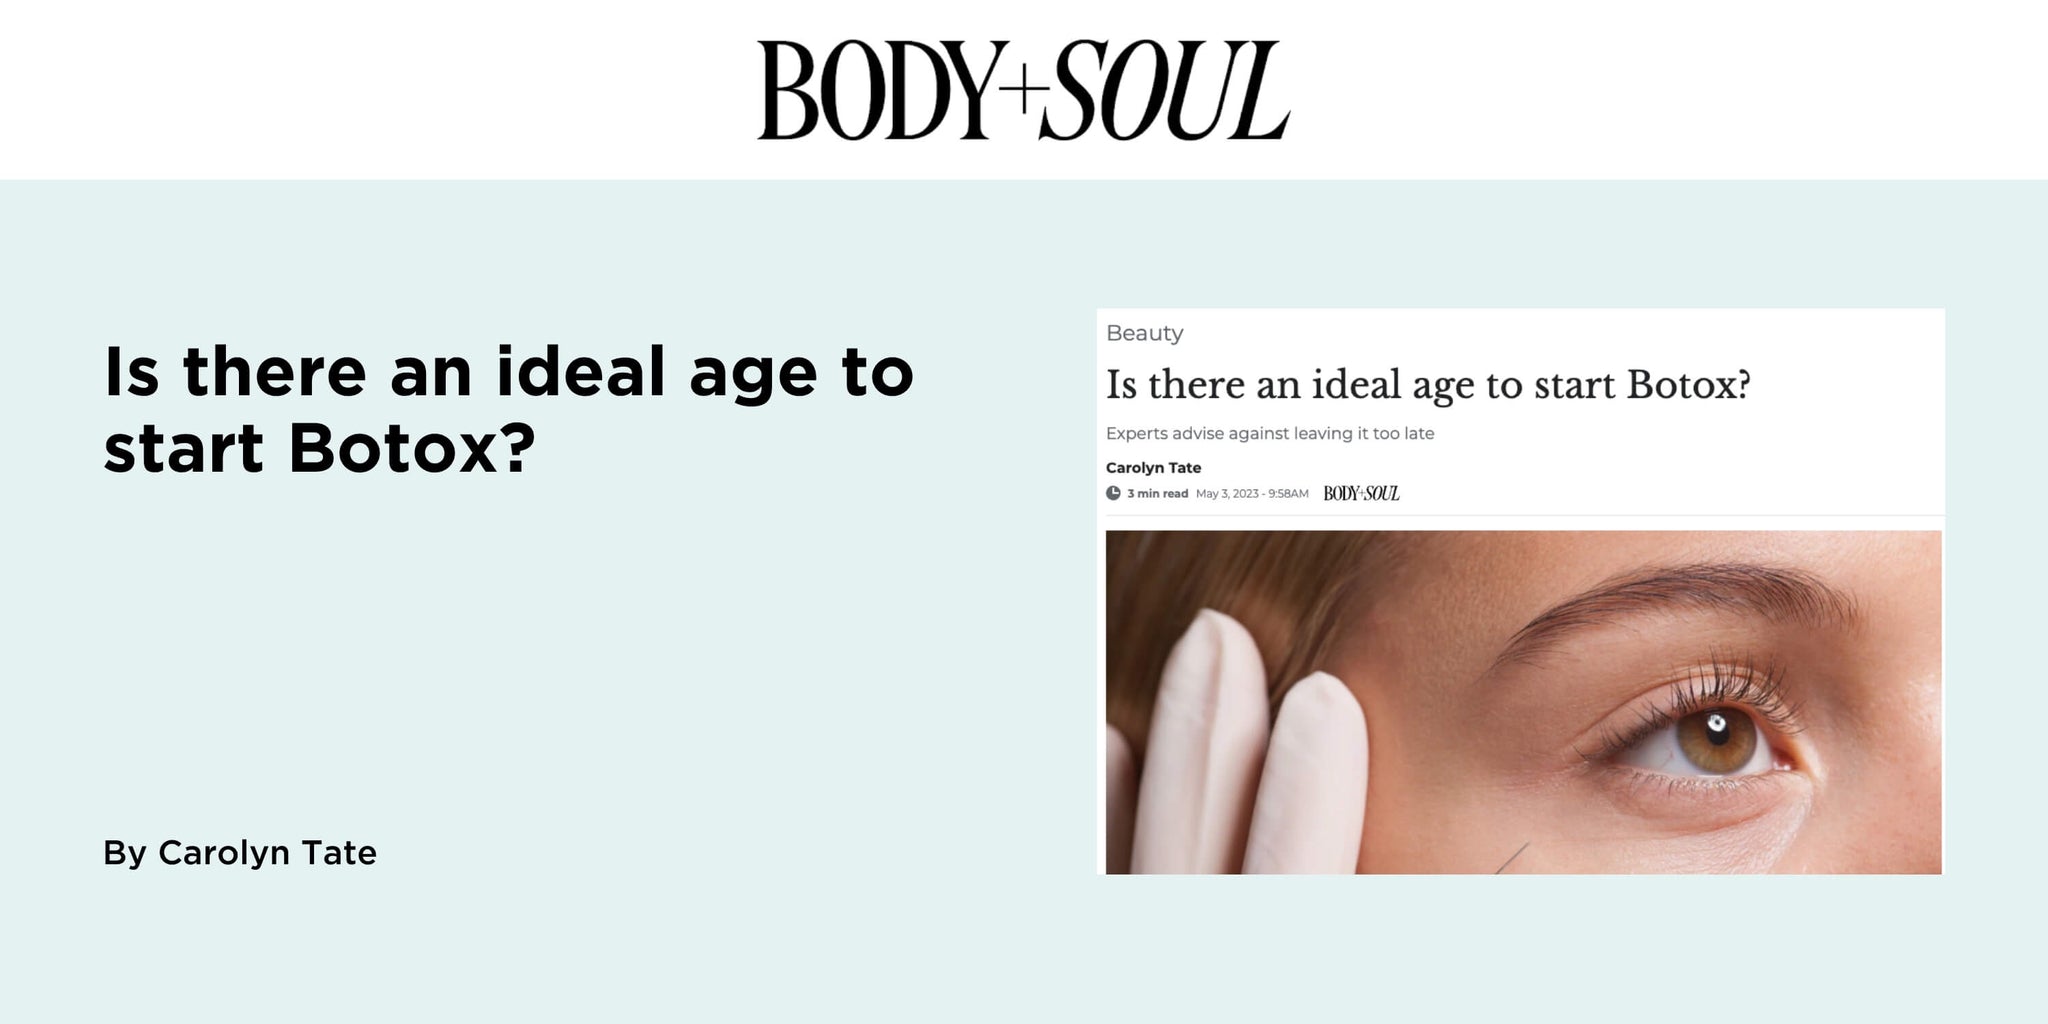 Is there an ideal age to start Botox?